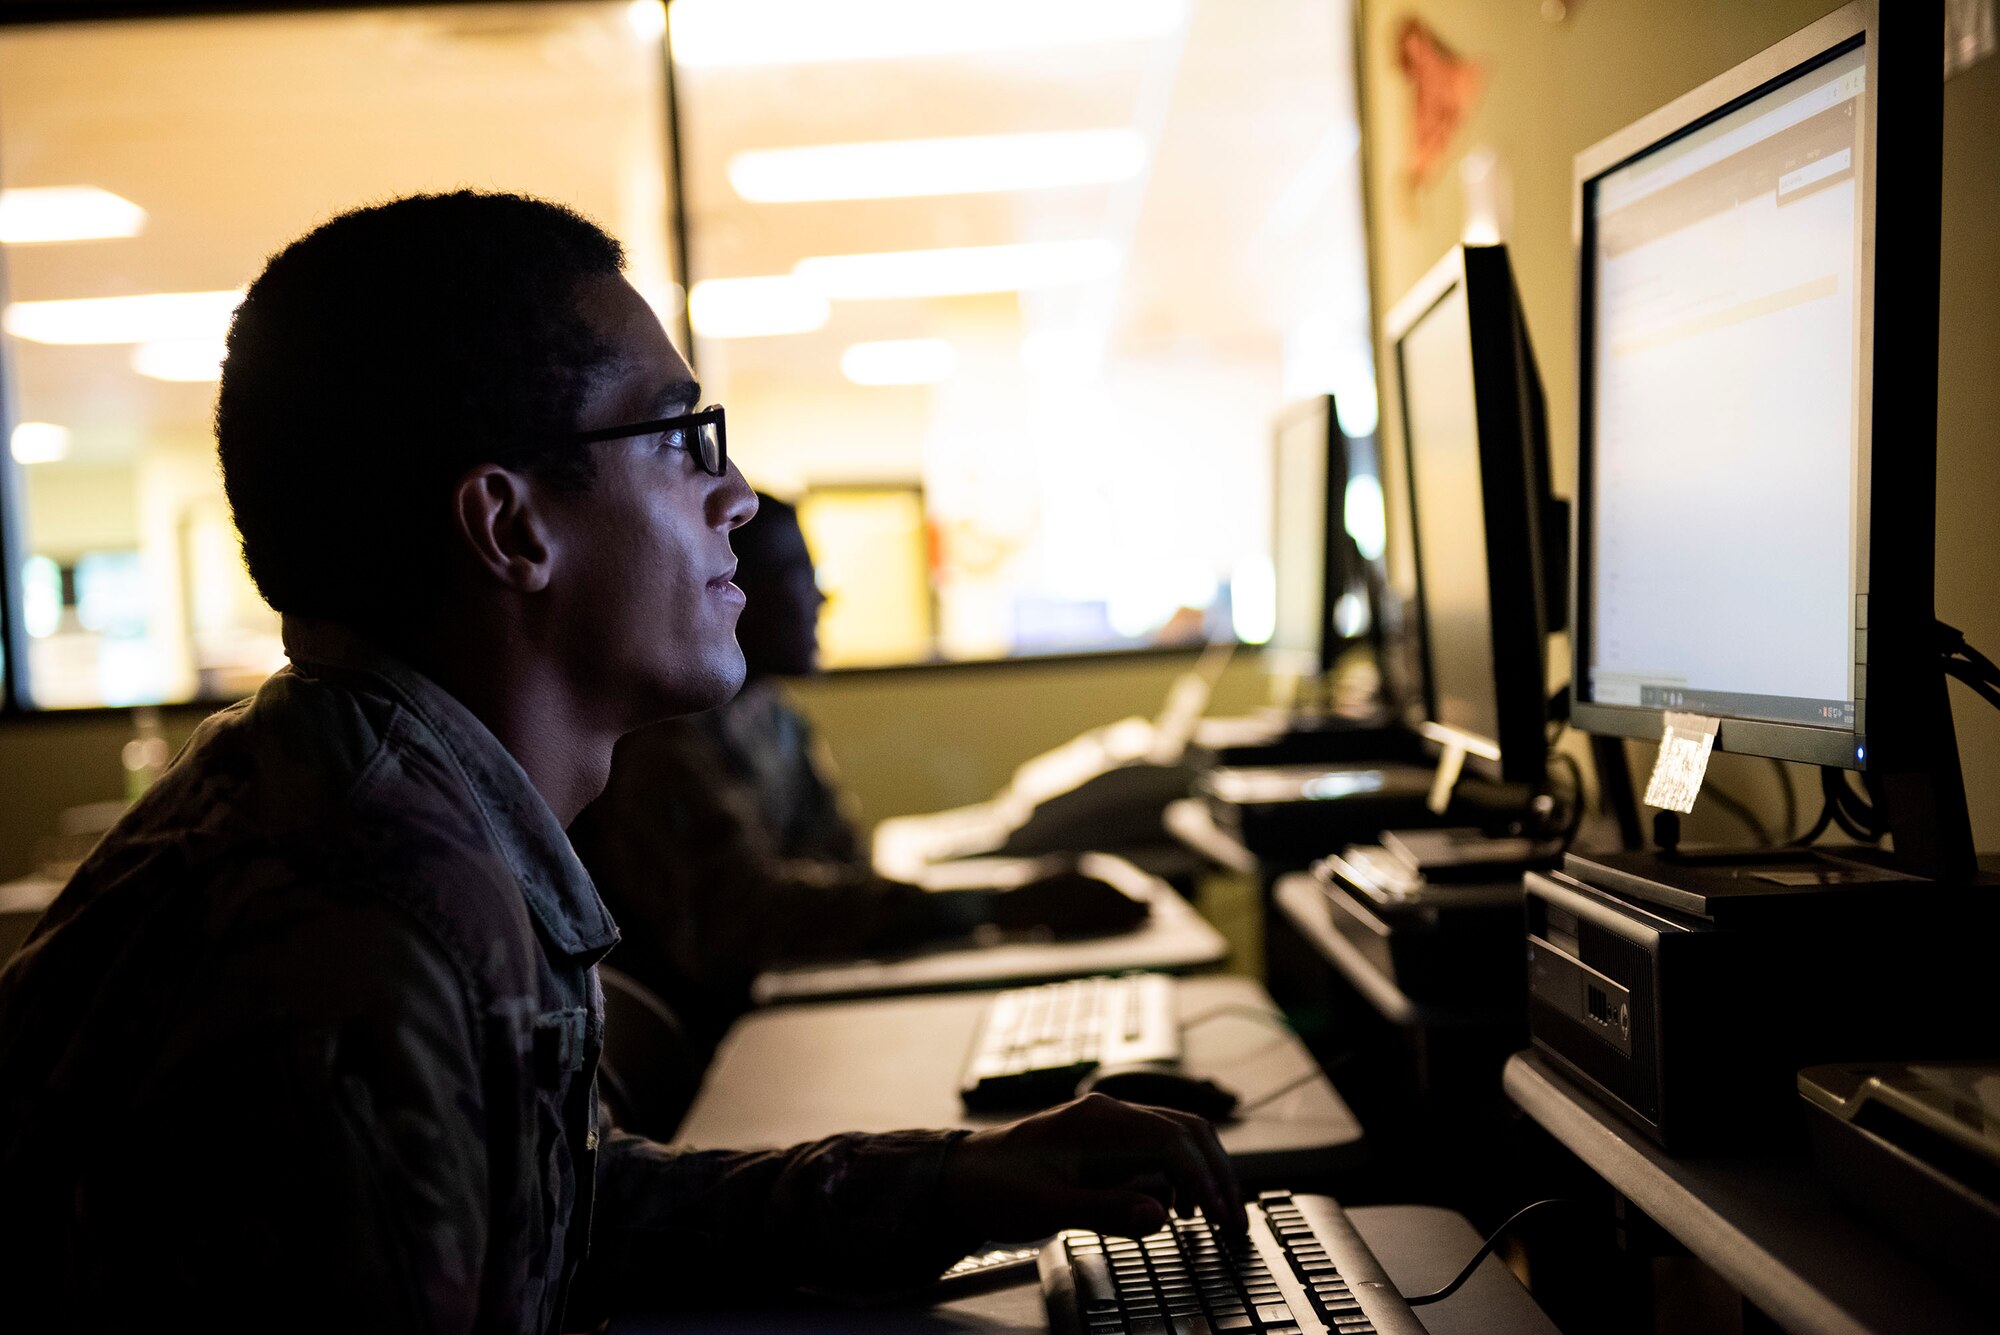 Airman 1st Class Michael Southerly, 823d Base Defense Squadron fireteam member, performs computer-based training Sept. 5, 2019, at Moody Air Force Base, Ga. The education center at the information Learning Center equips Airmen with the tools they need to further their education, be it finishing their Community College of the Air Force degree or continuing higher education. (U.S. Air Force photo by Senior Airman Erick Requadt)